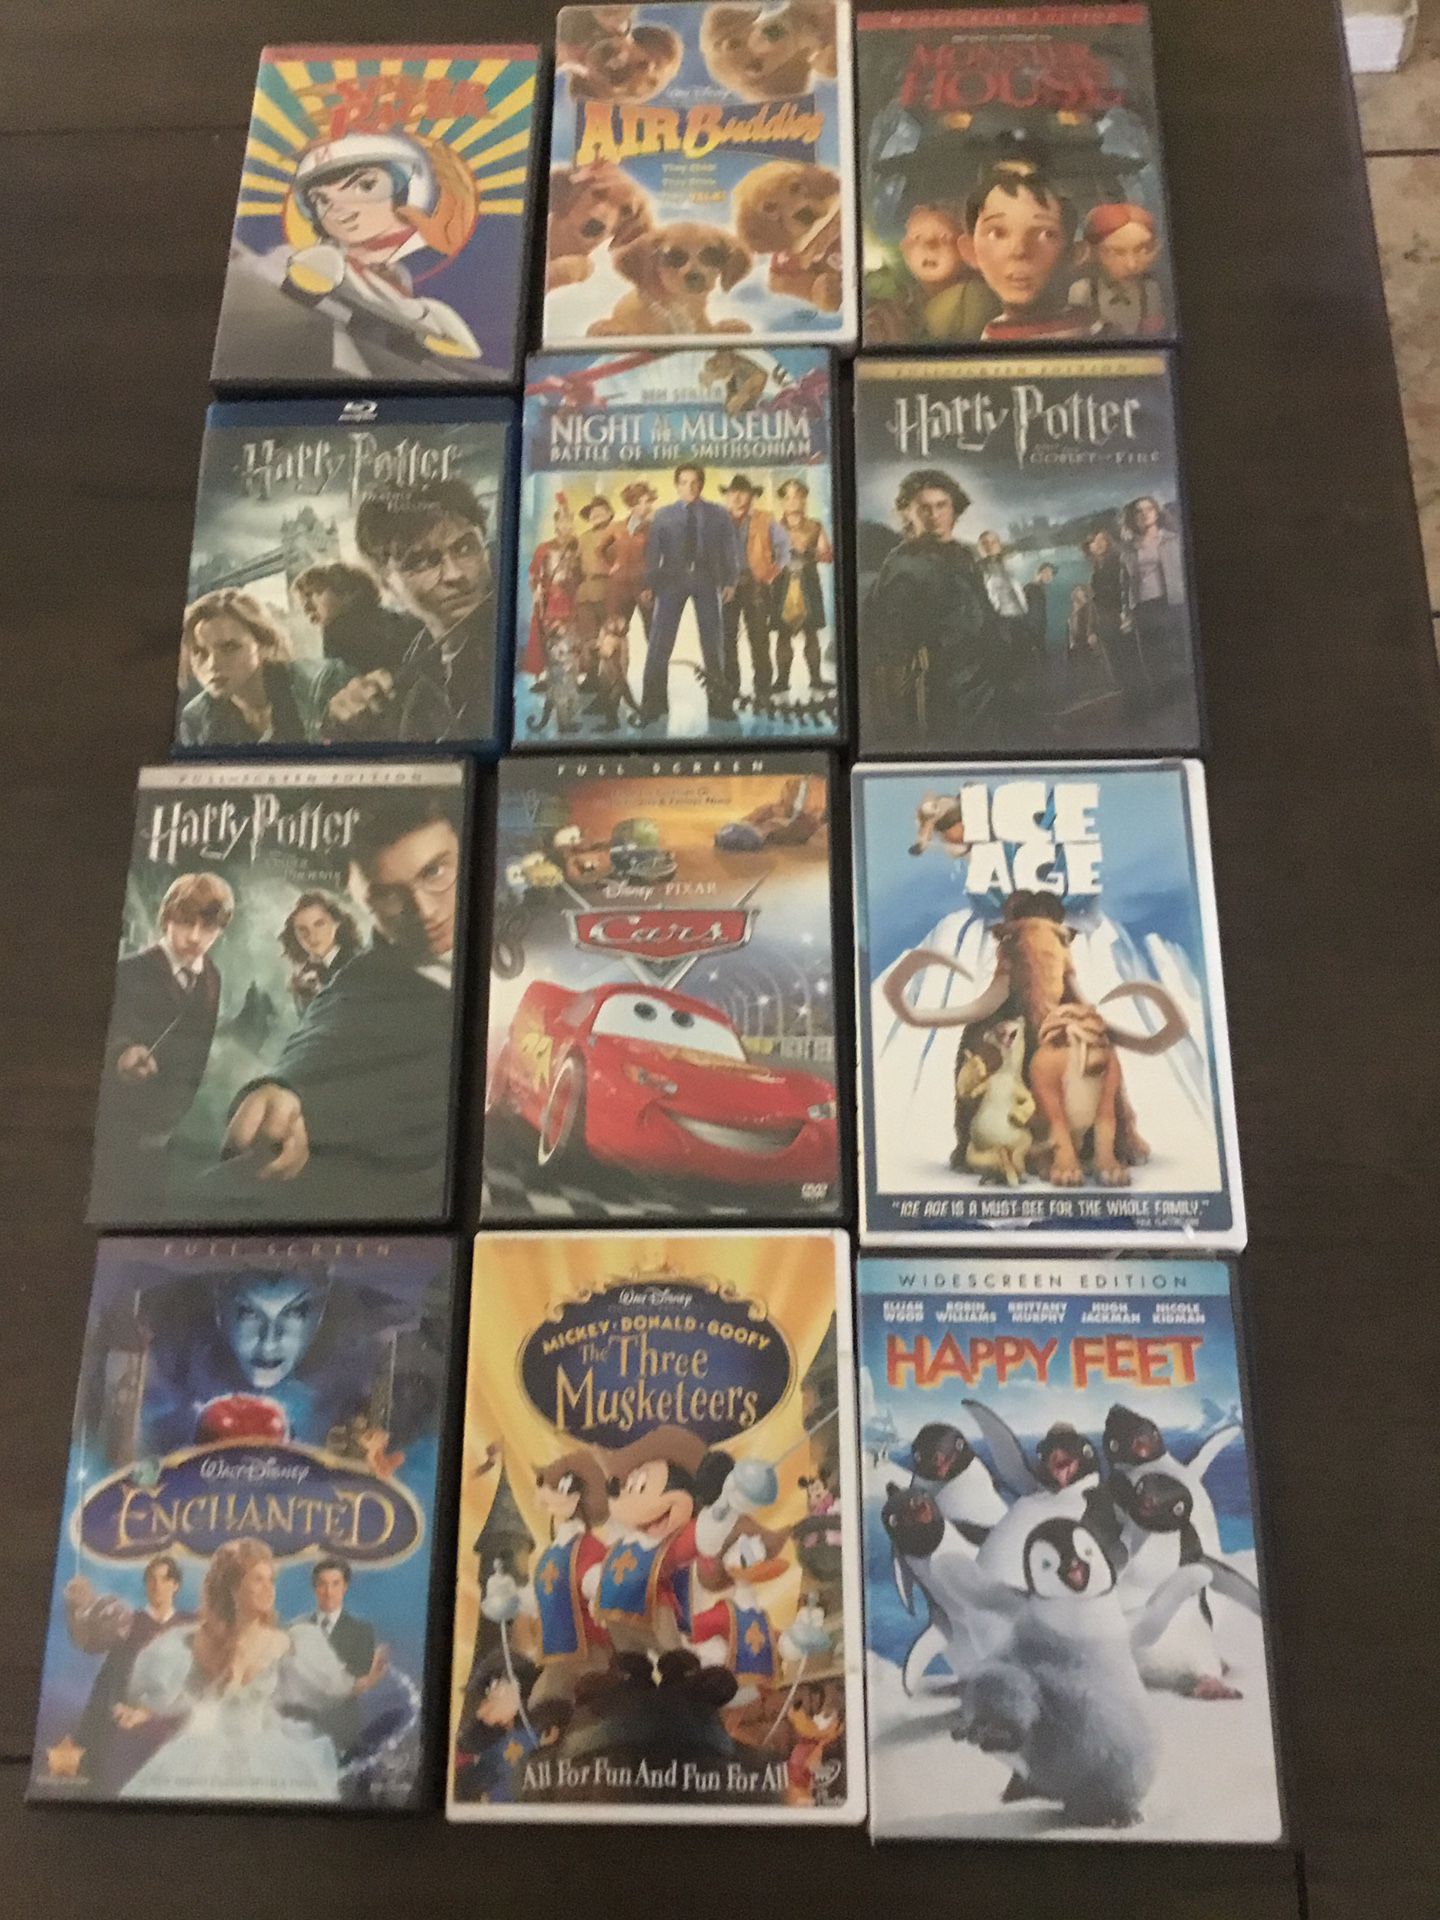 Dvd movies $2 each or 3 for $5 or 7 for $10